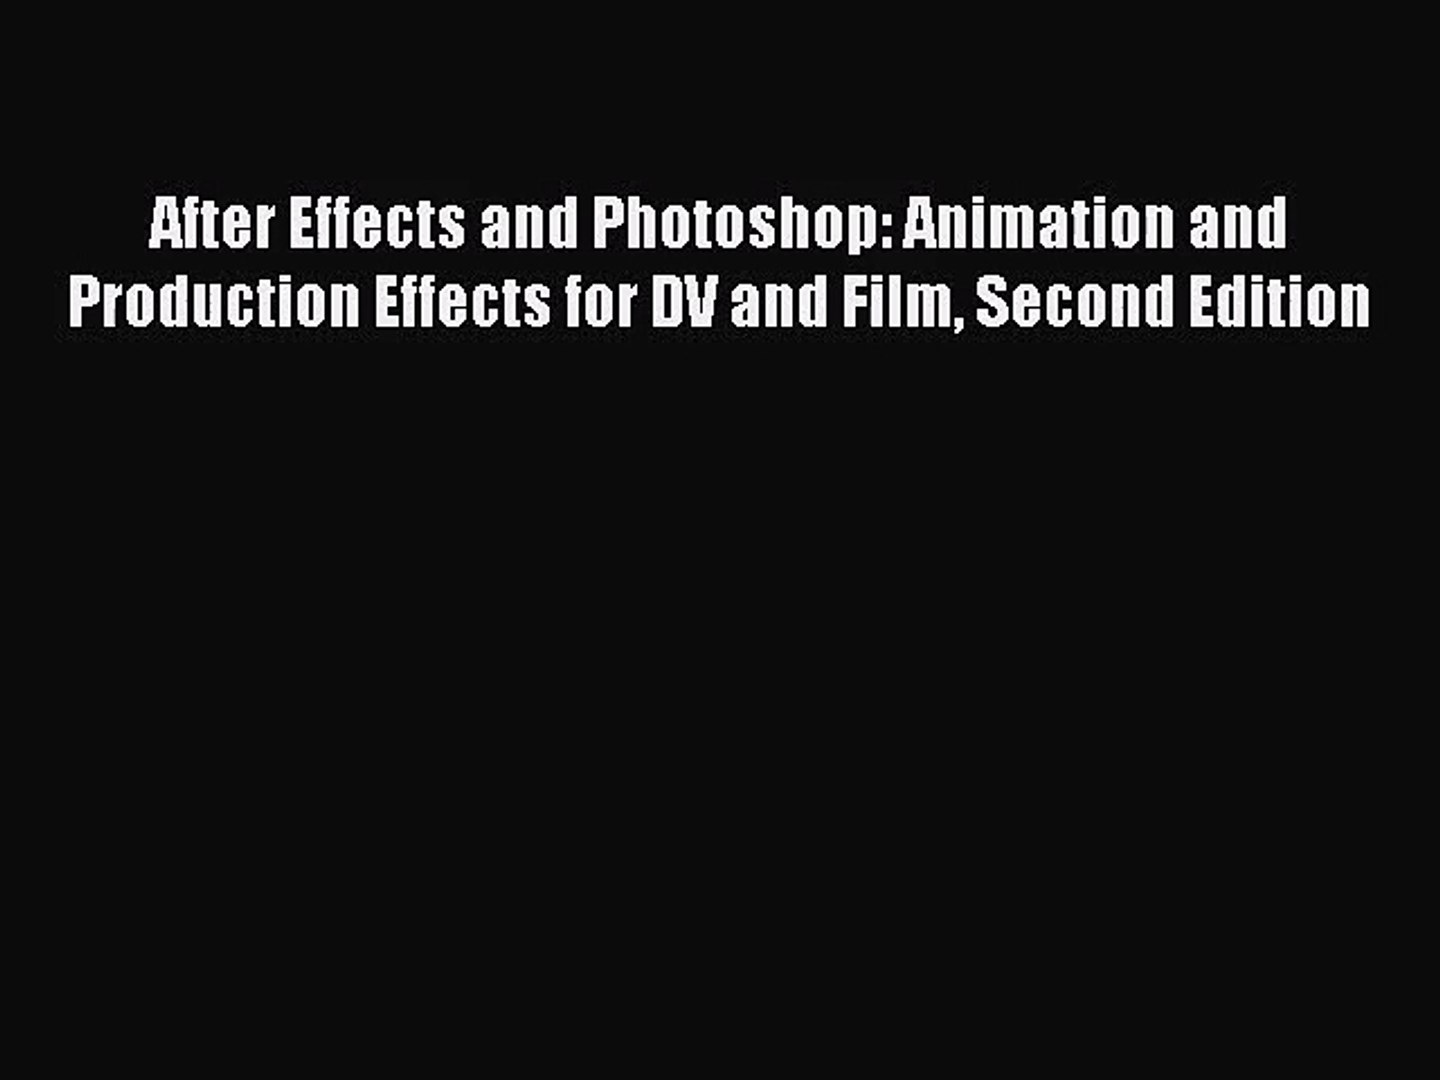 After Effects and Photoshop: Animation and Production Effects for DV and Film Second Edition